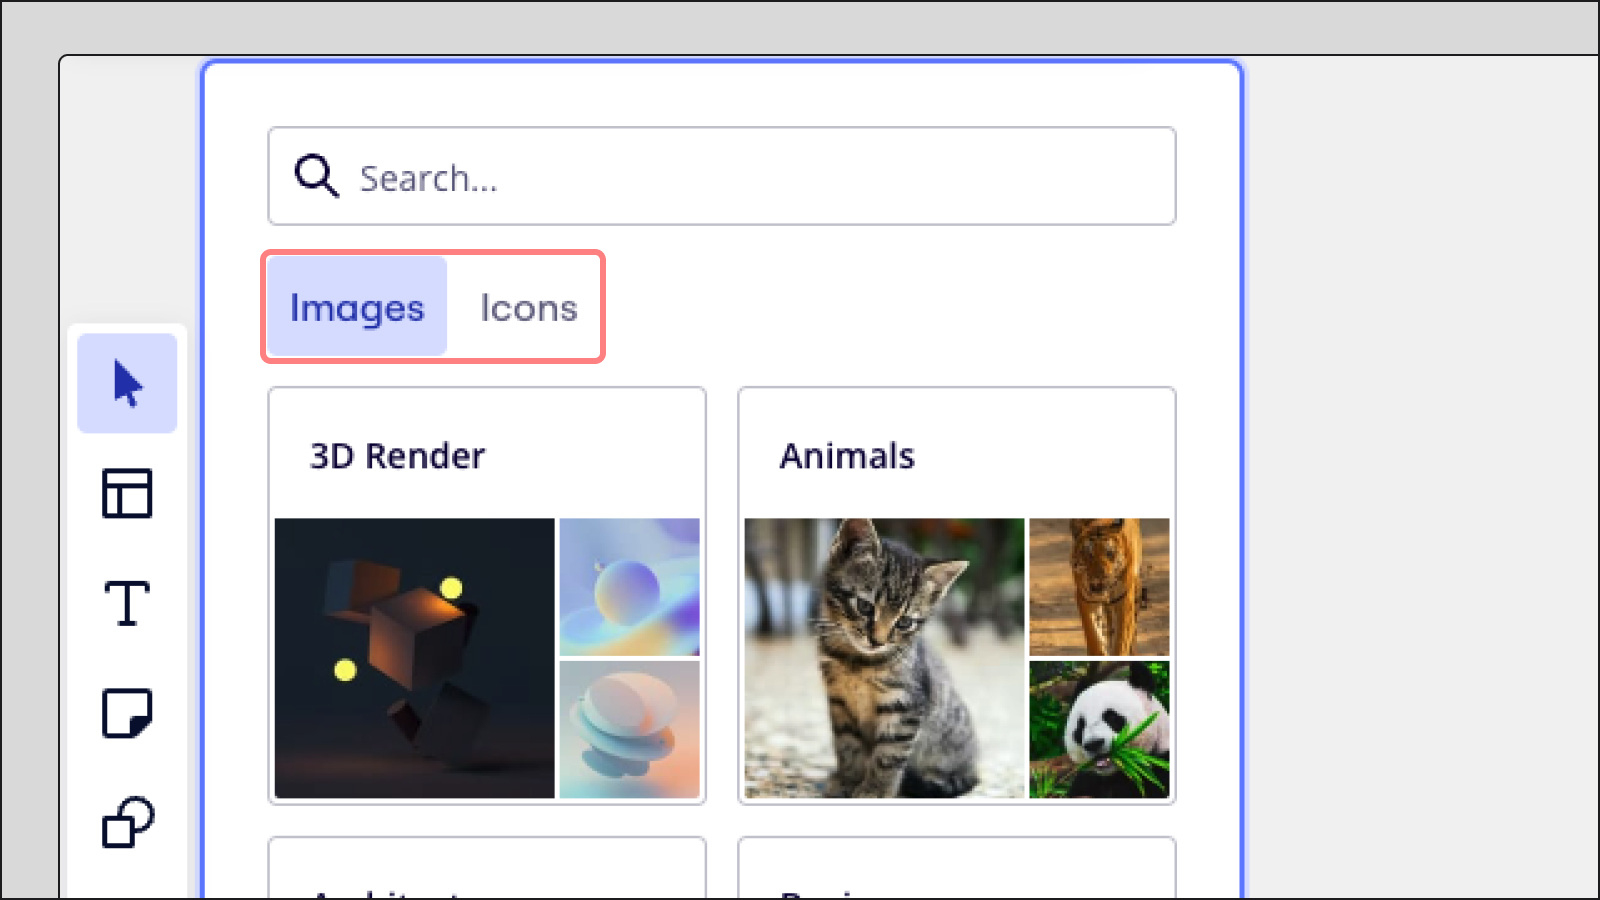 Images-and-Icons-tabs-visible-when-allowed-in-app-settings.png